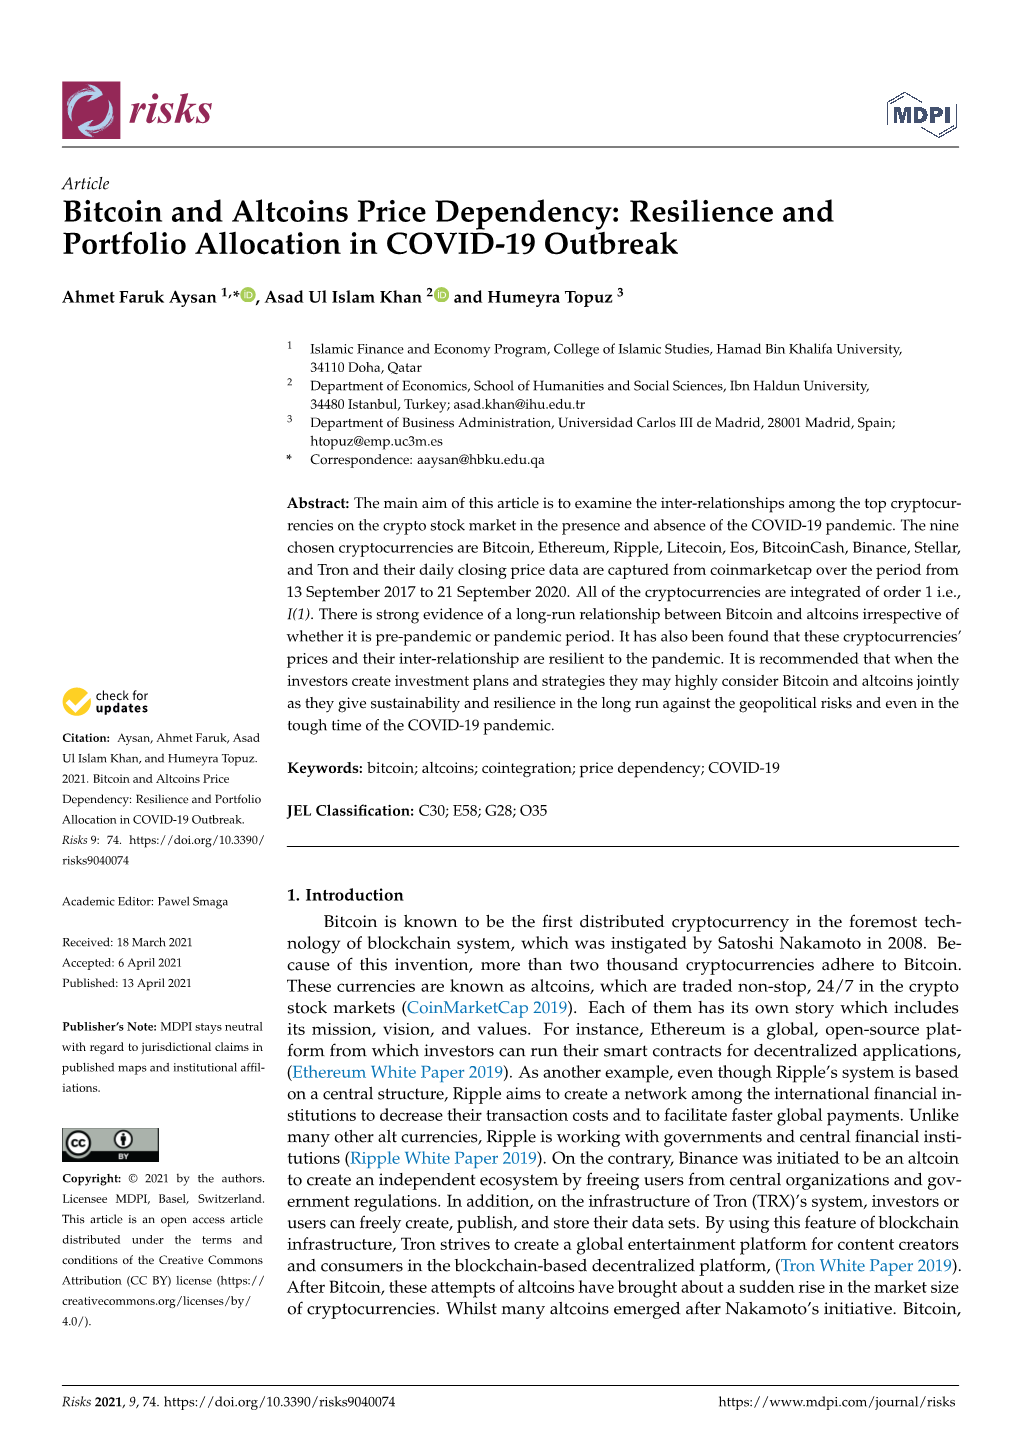 Bitcoin and Altcoins Price Dependency: Resilience and Portfolio Allocation in COVID-19 Outbreak